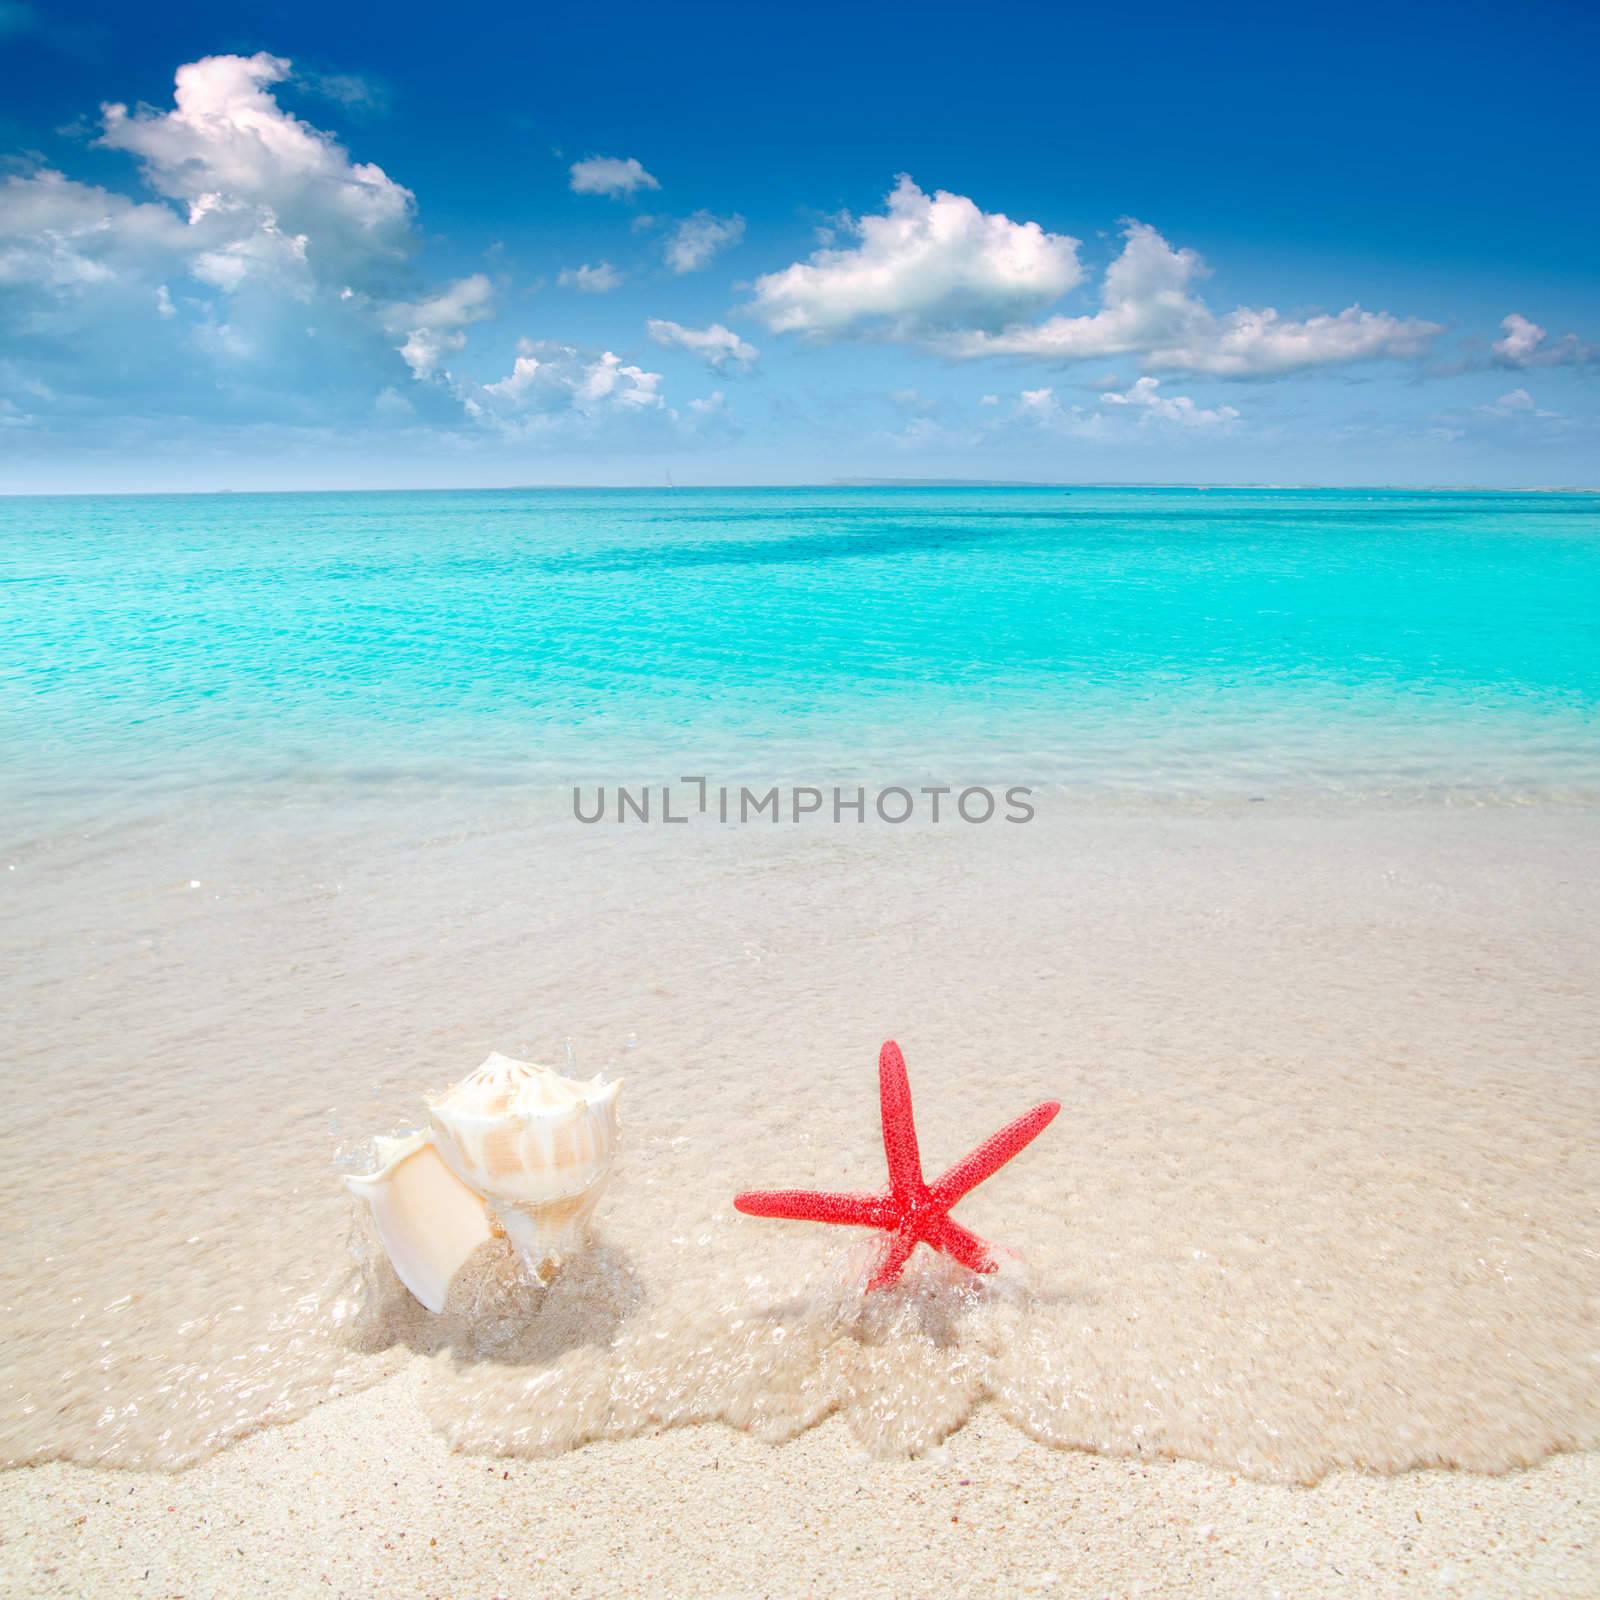 Starfish and seashell in white sand beach with turquoise tropical water